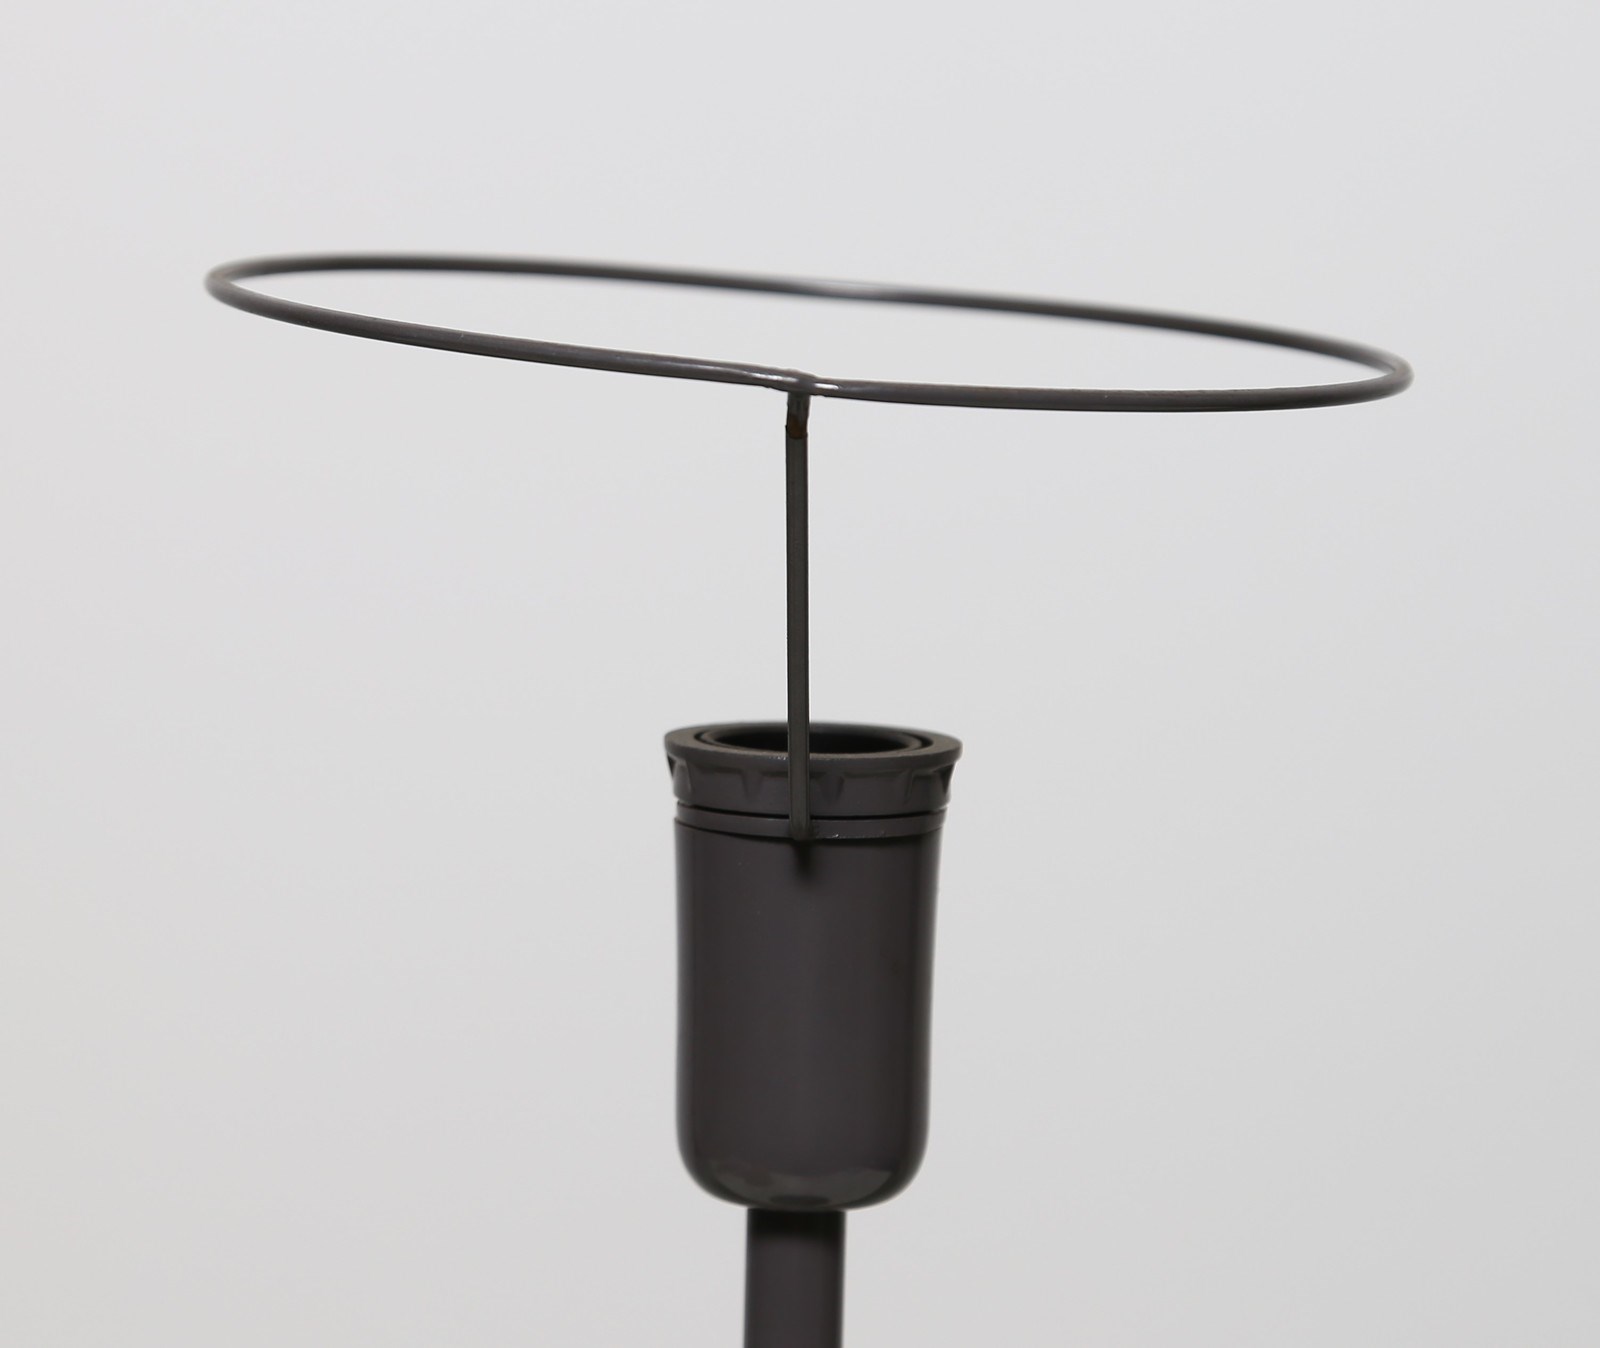 MAN RAY Table lamp. - Image 3 of 5